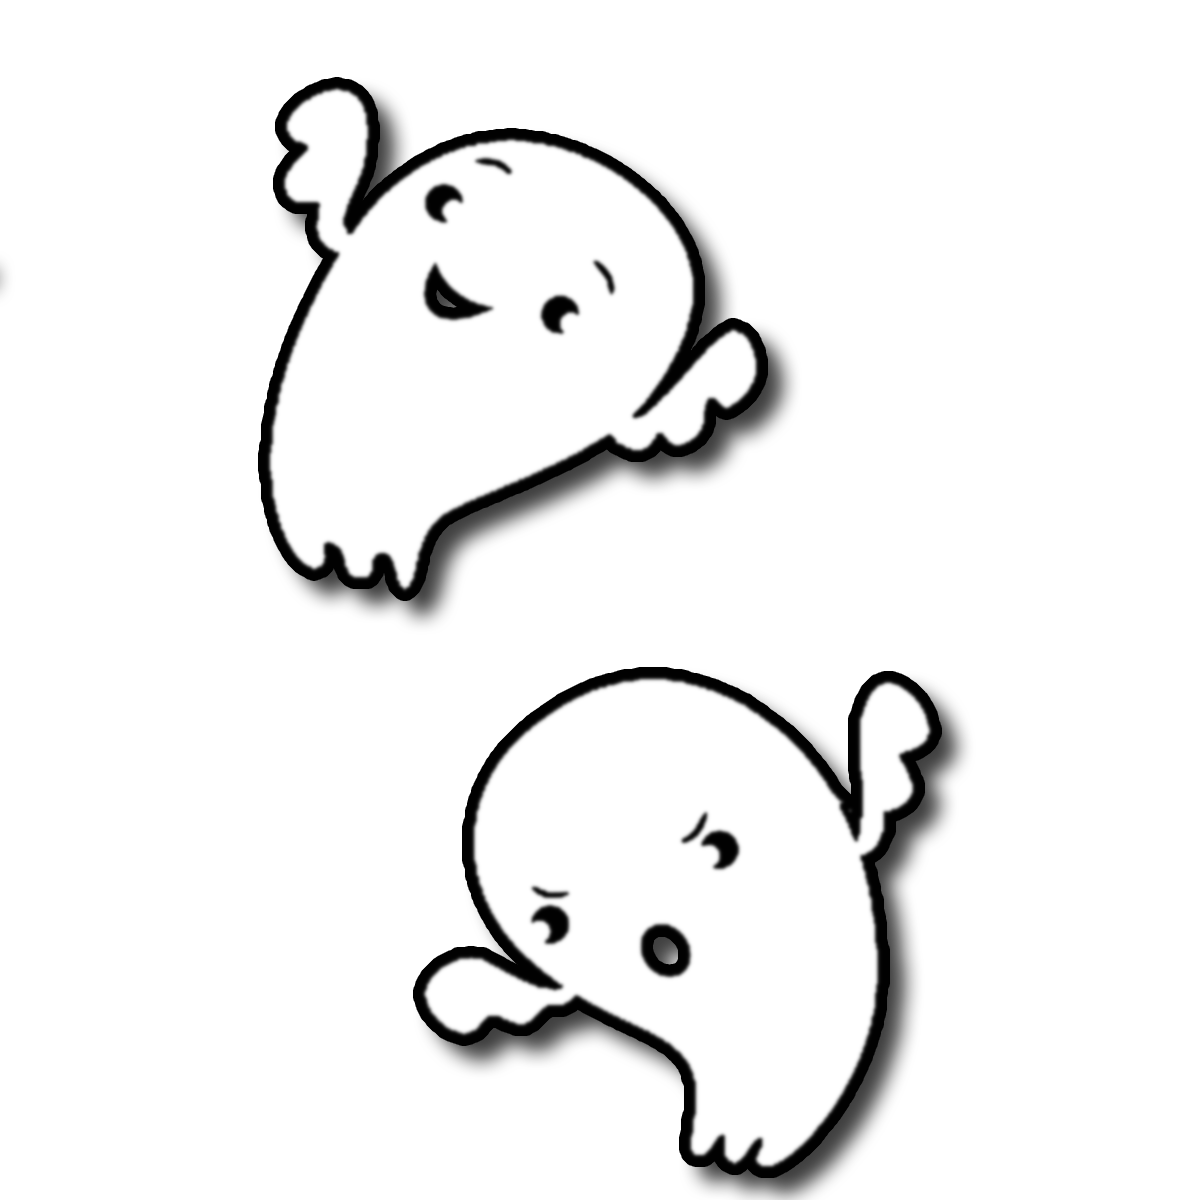 free black and white ghost clipart - photo #12